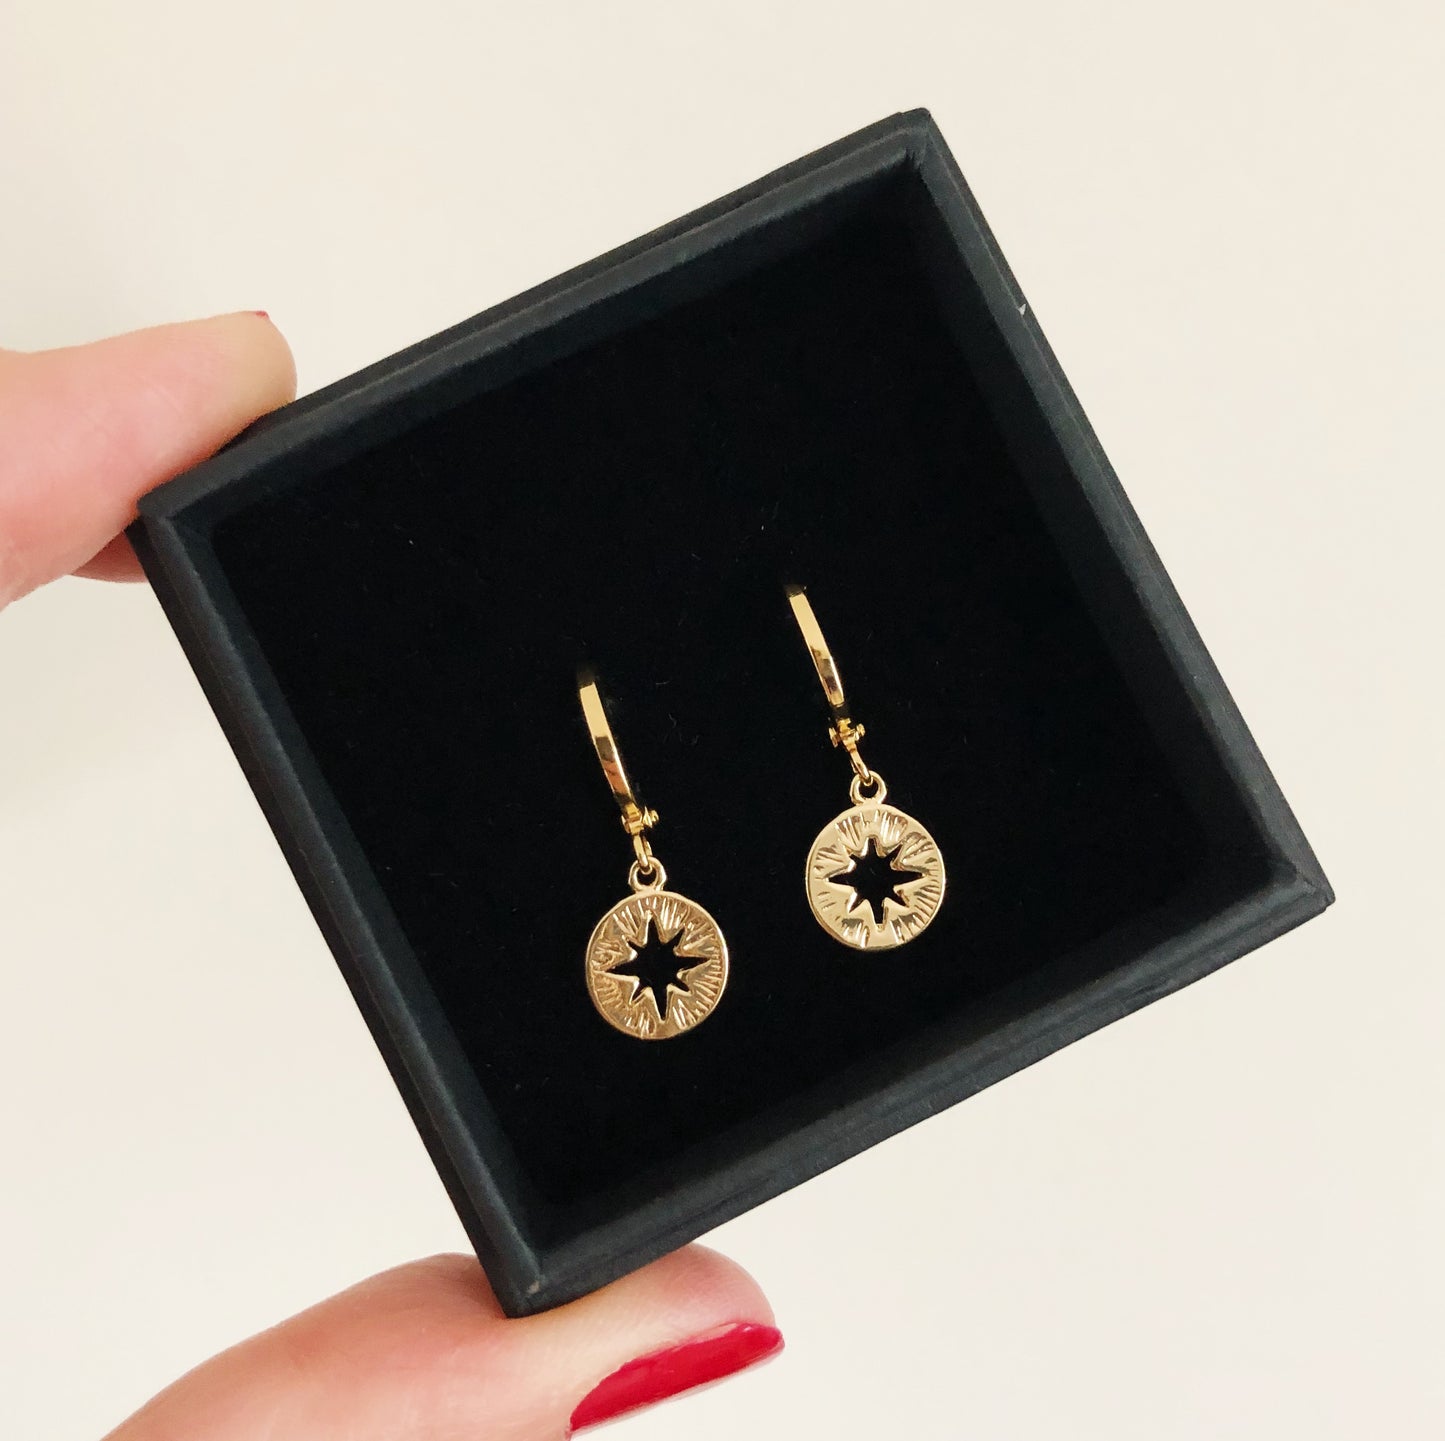 Mini hoop earrings with circle discs with star